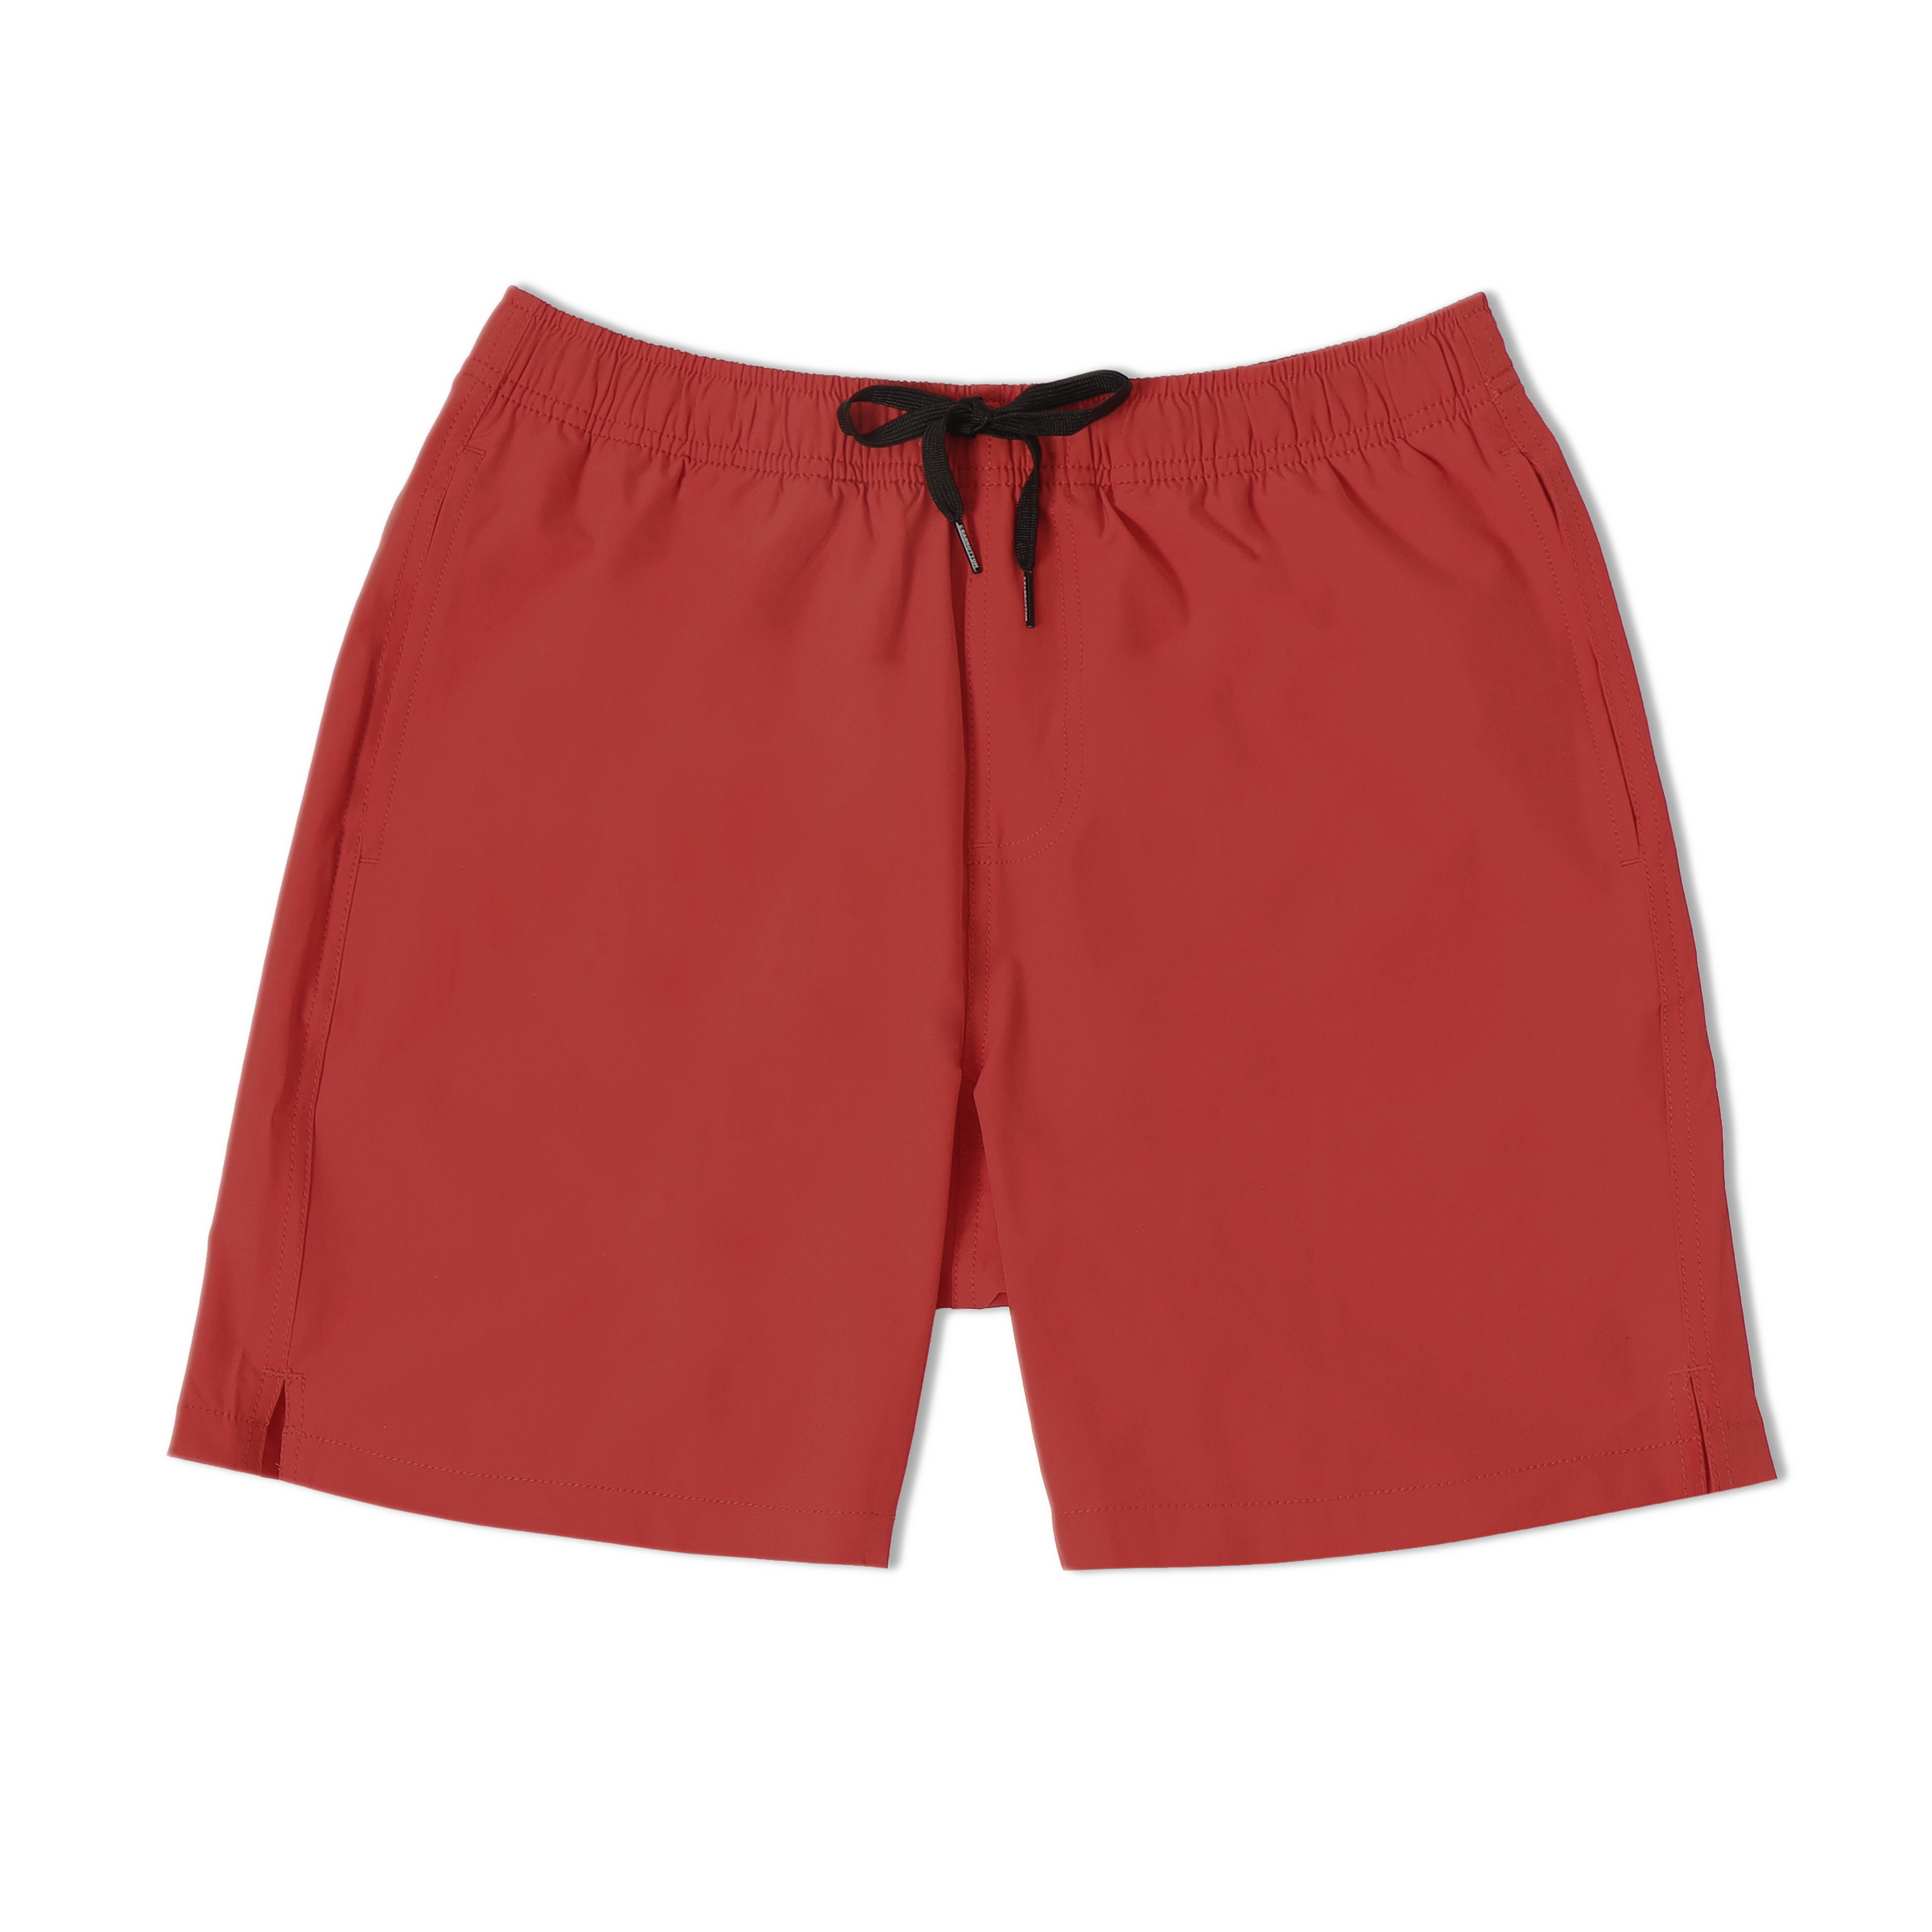 Stretch Swim 7" in Red front with elastic waistband, black drawstring, and two inseam pockets